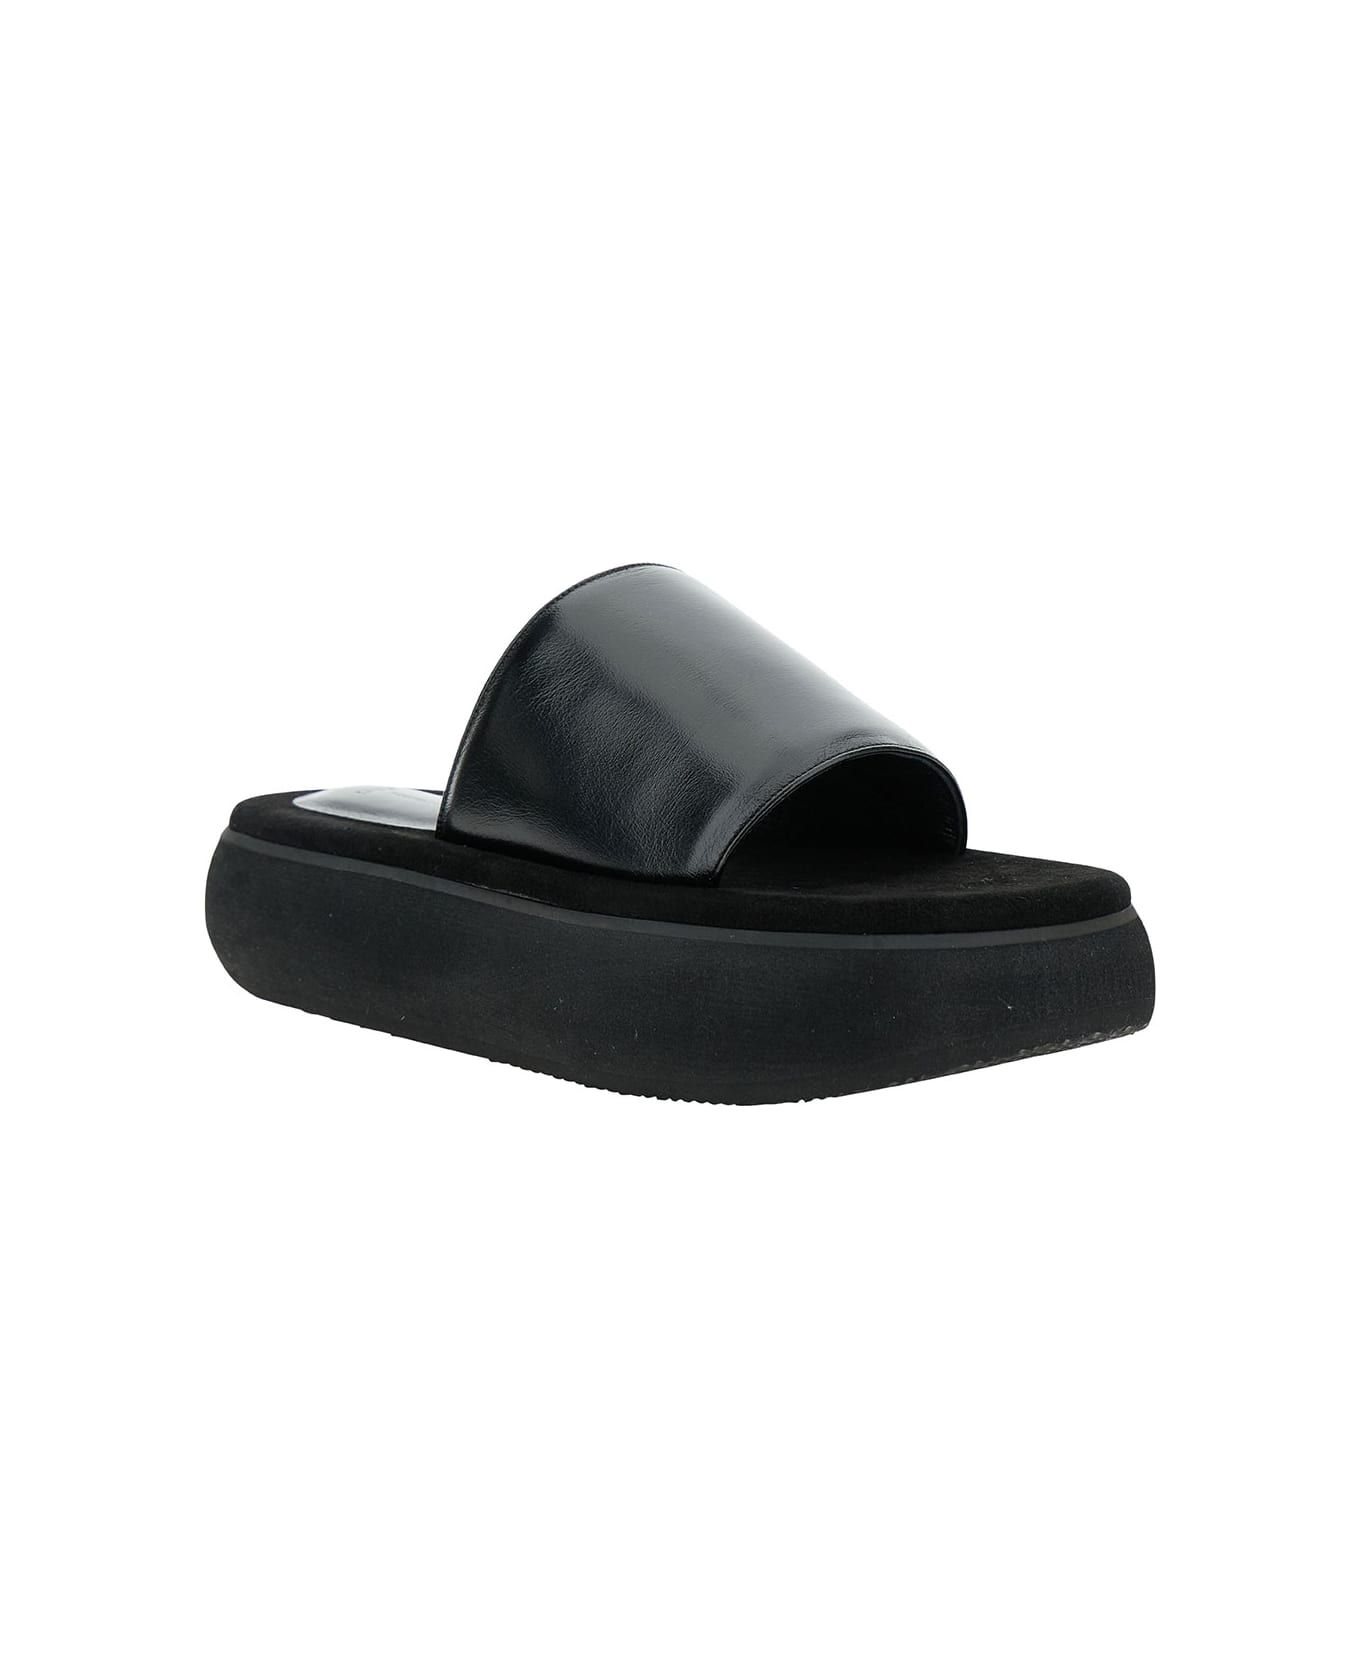 OSOI Black Padded Slides With Chunky Sole In Leather Woman - Black